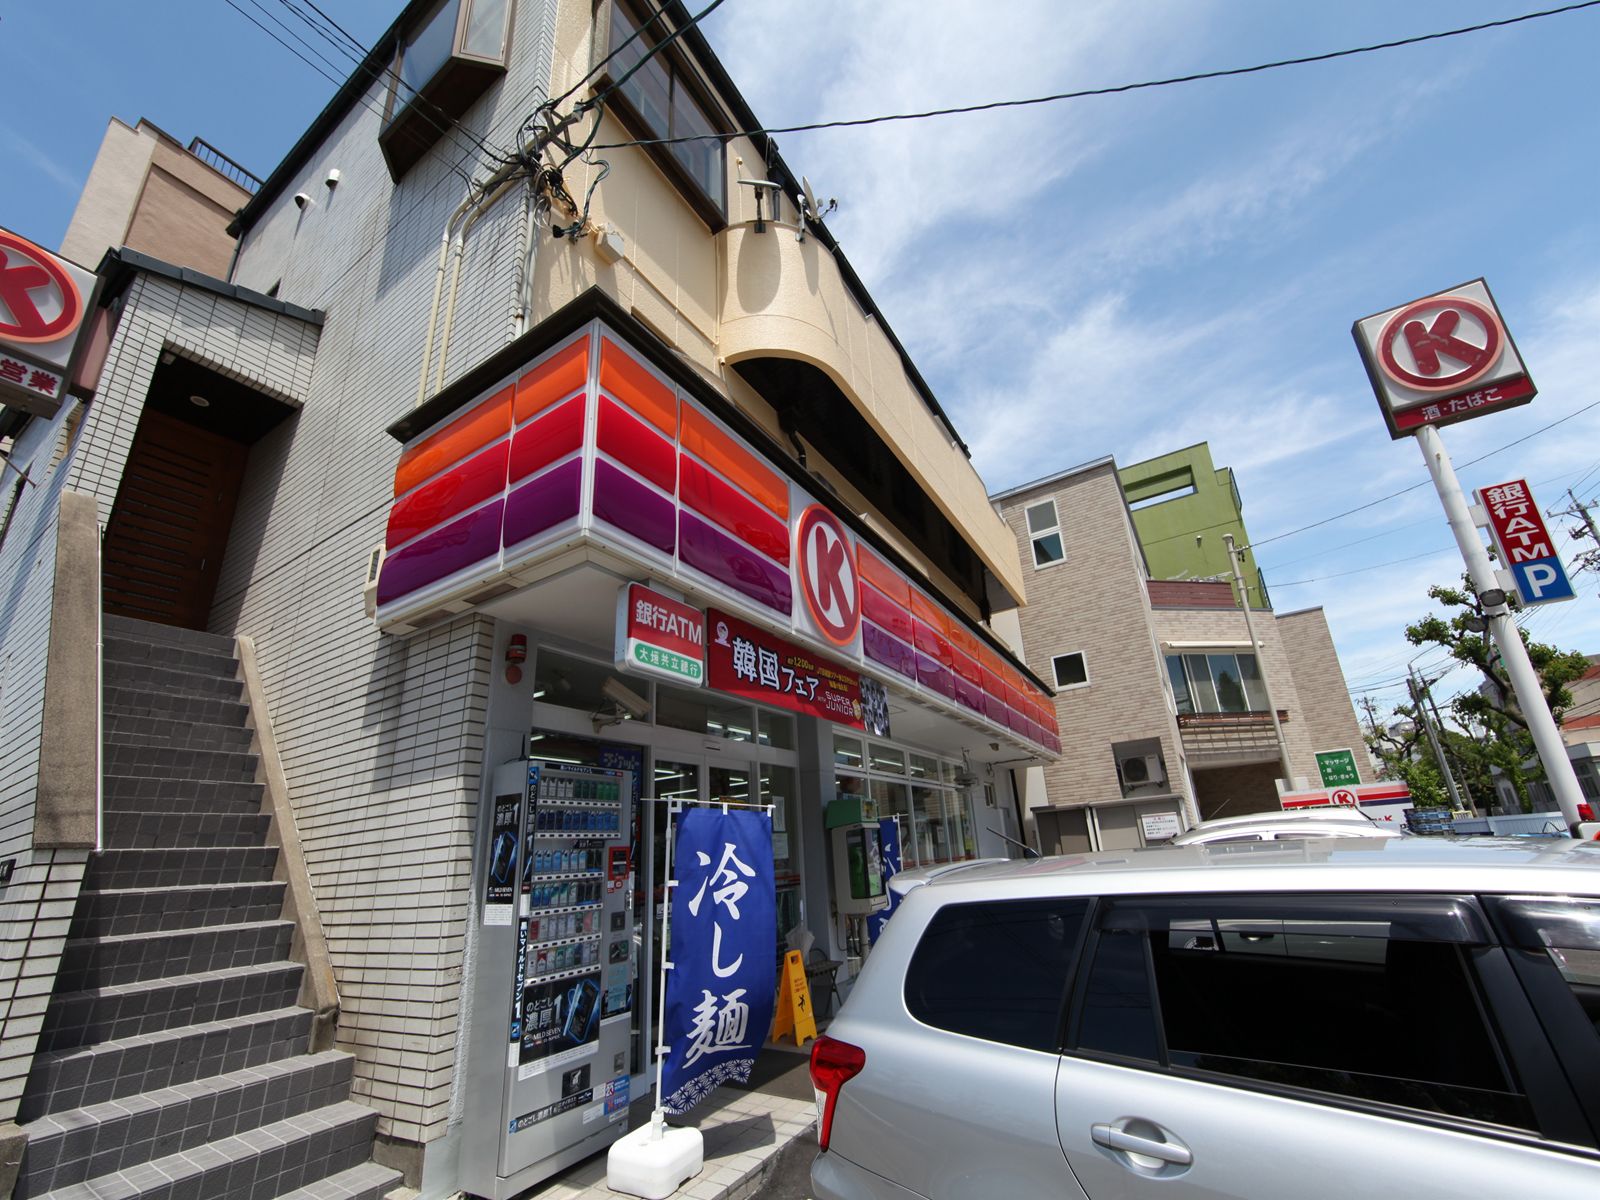 Convenience store. 199m to Circle K platinum store (convenience store)